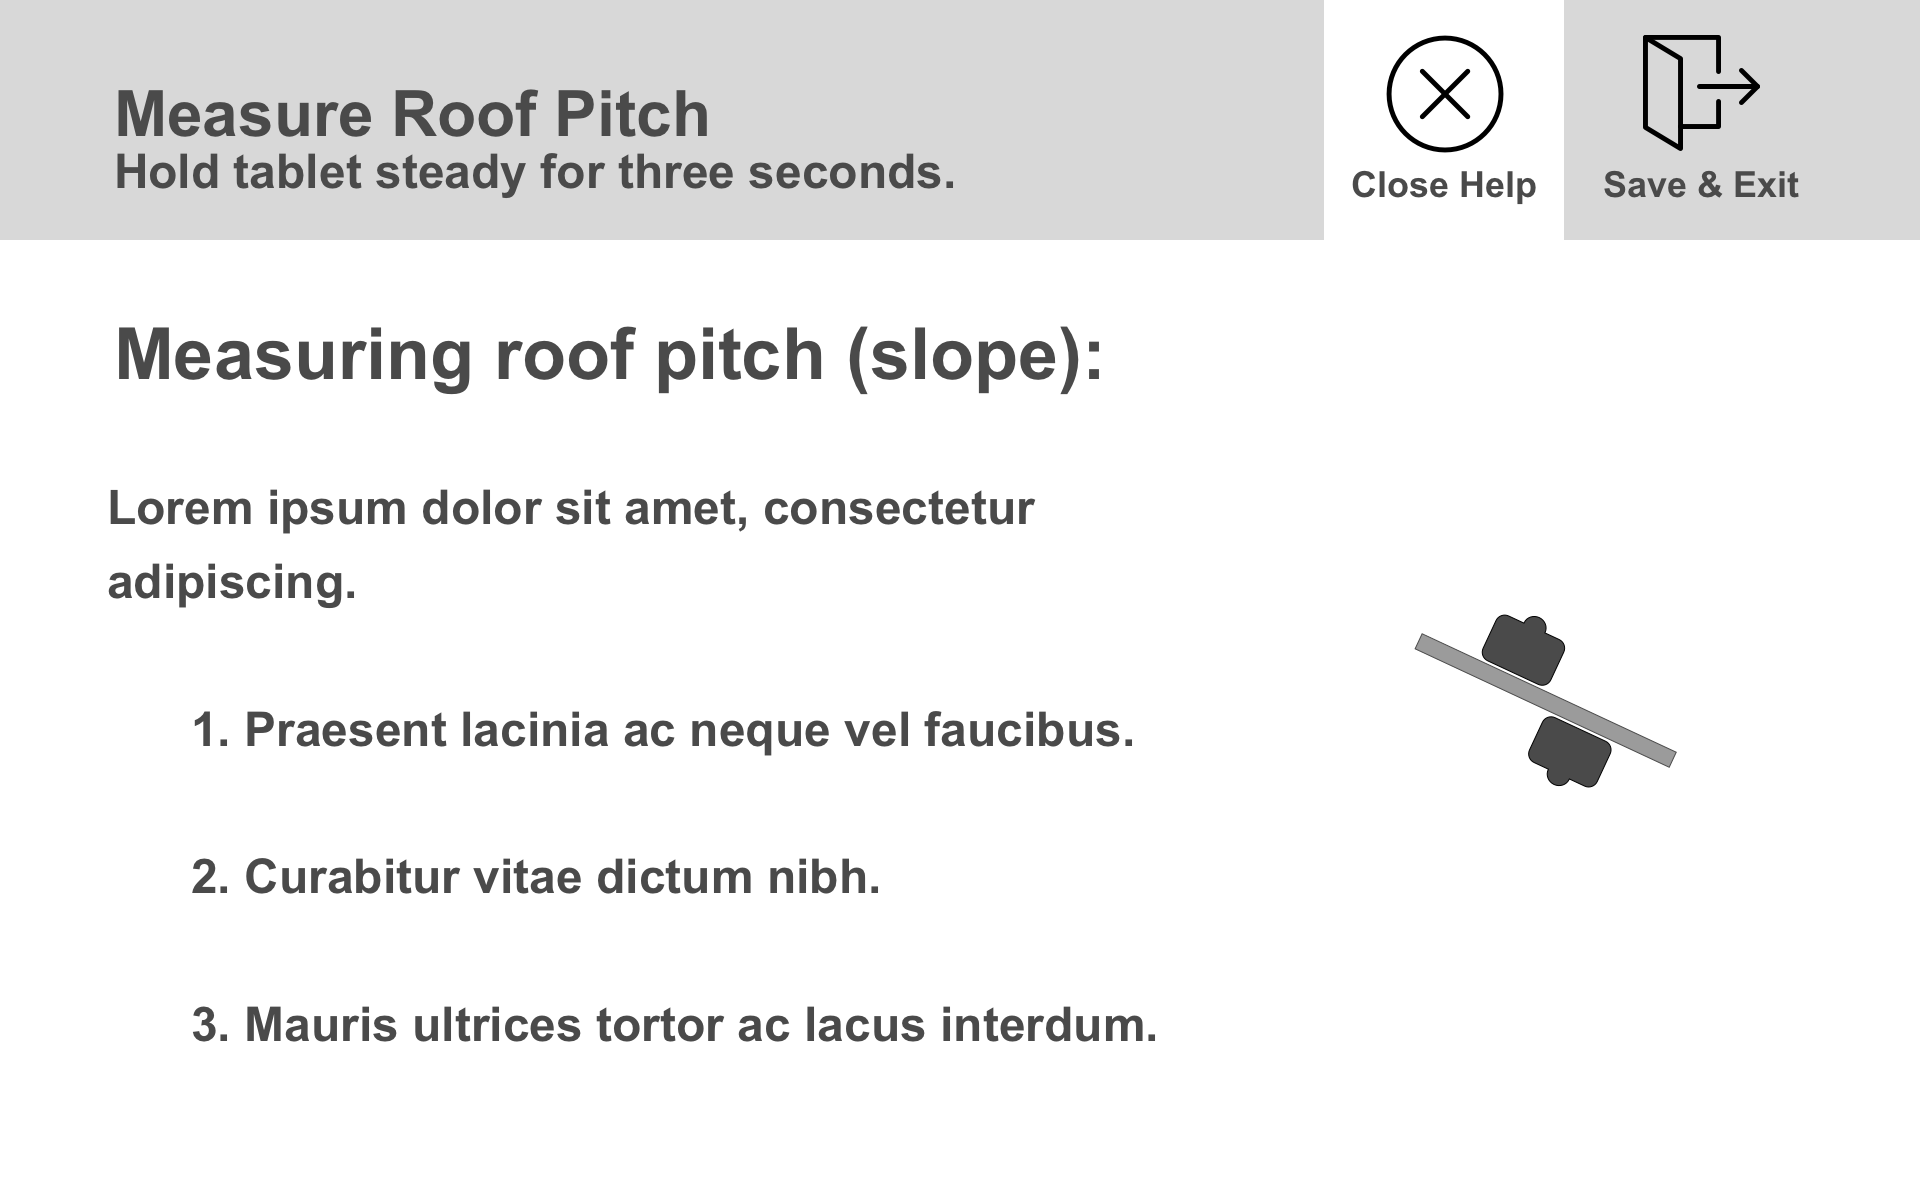 4.0.0_Structural_Roof_Pitch-Instructions.png